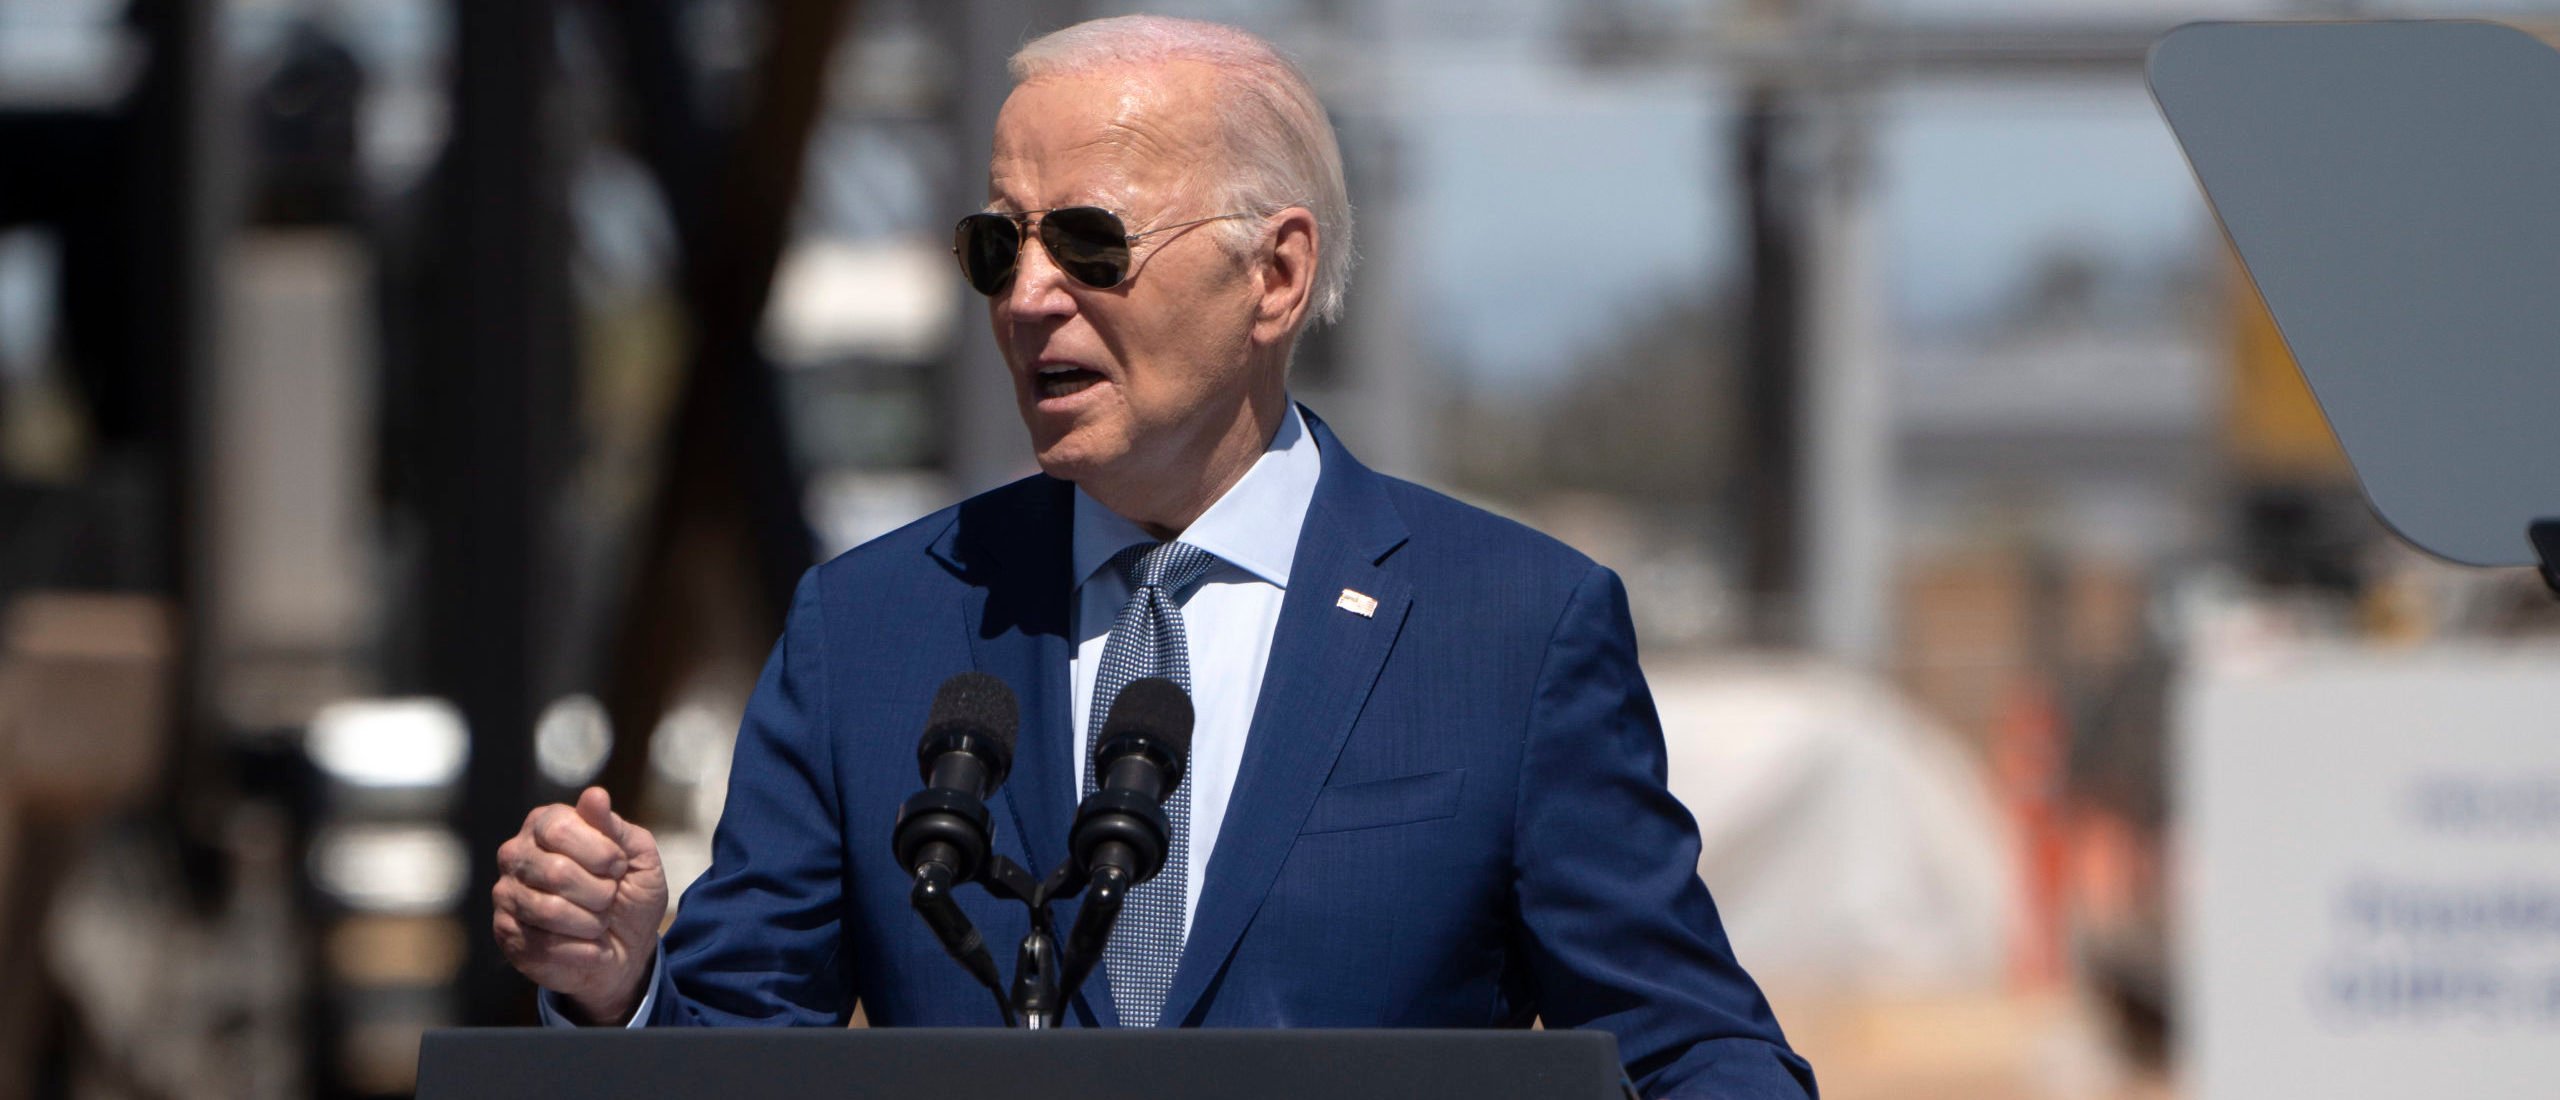  Despite Police Pushback, Biden Presses On With Visit To Syracuse After Two Cops Were Just Slain 